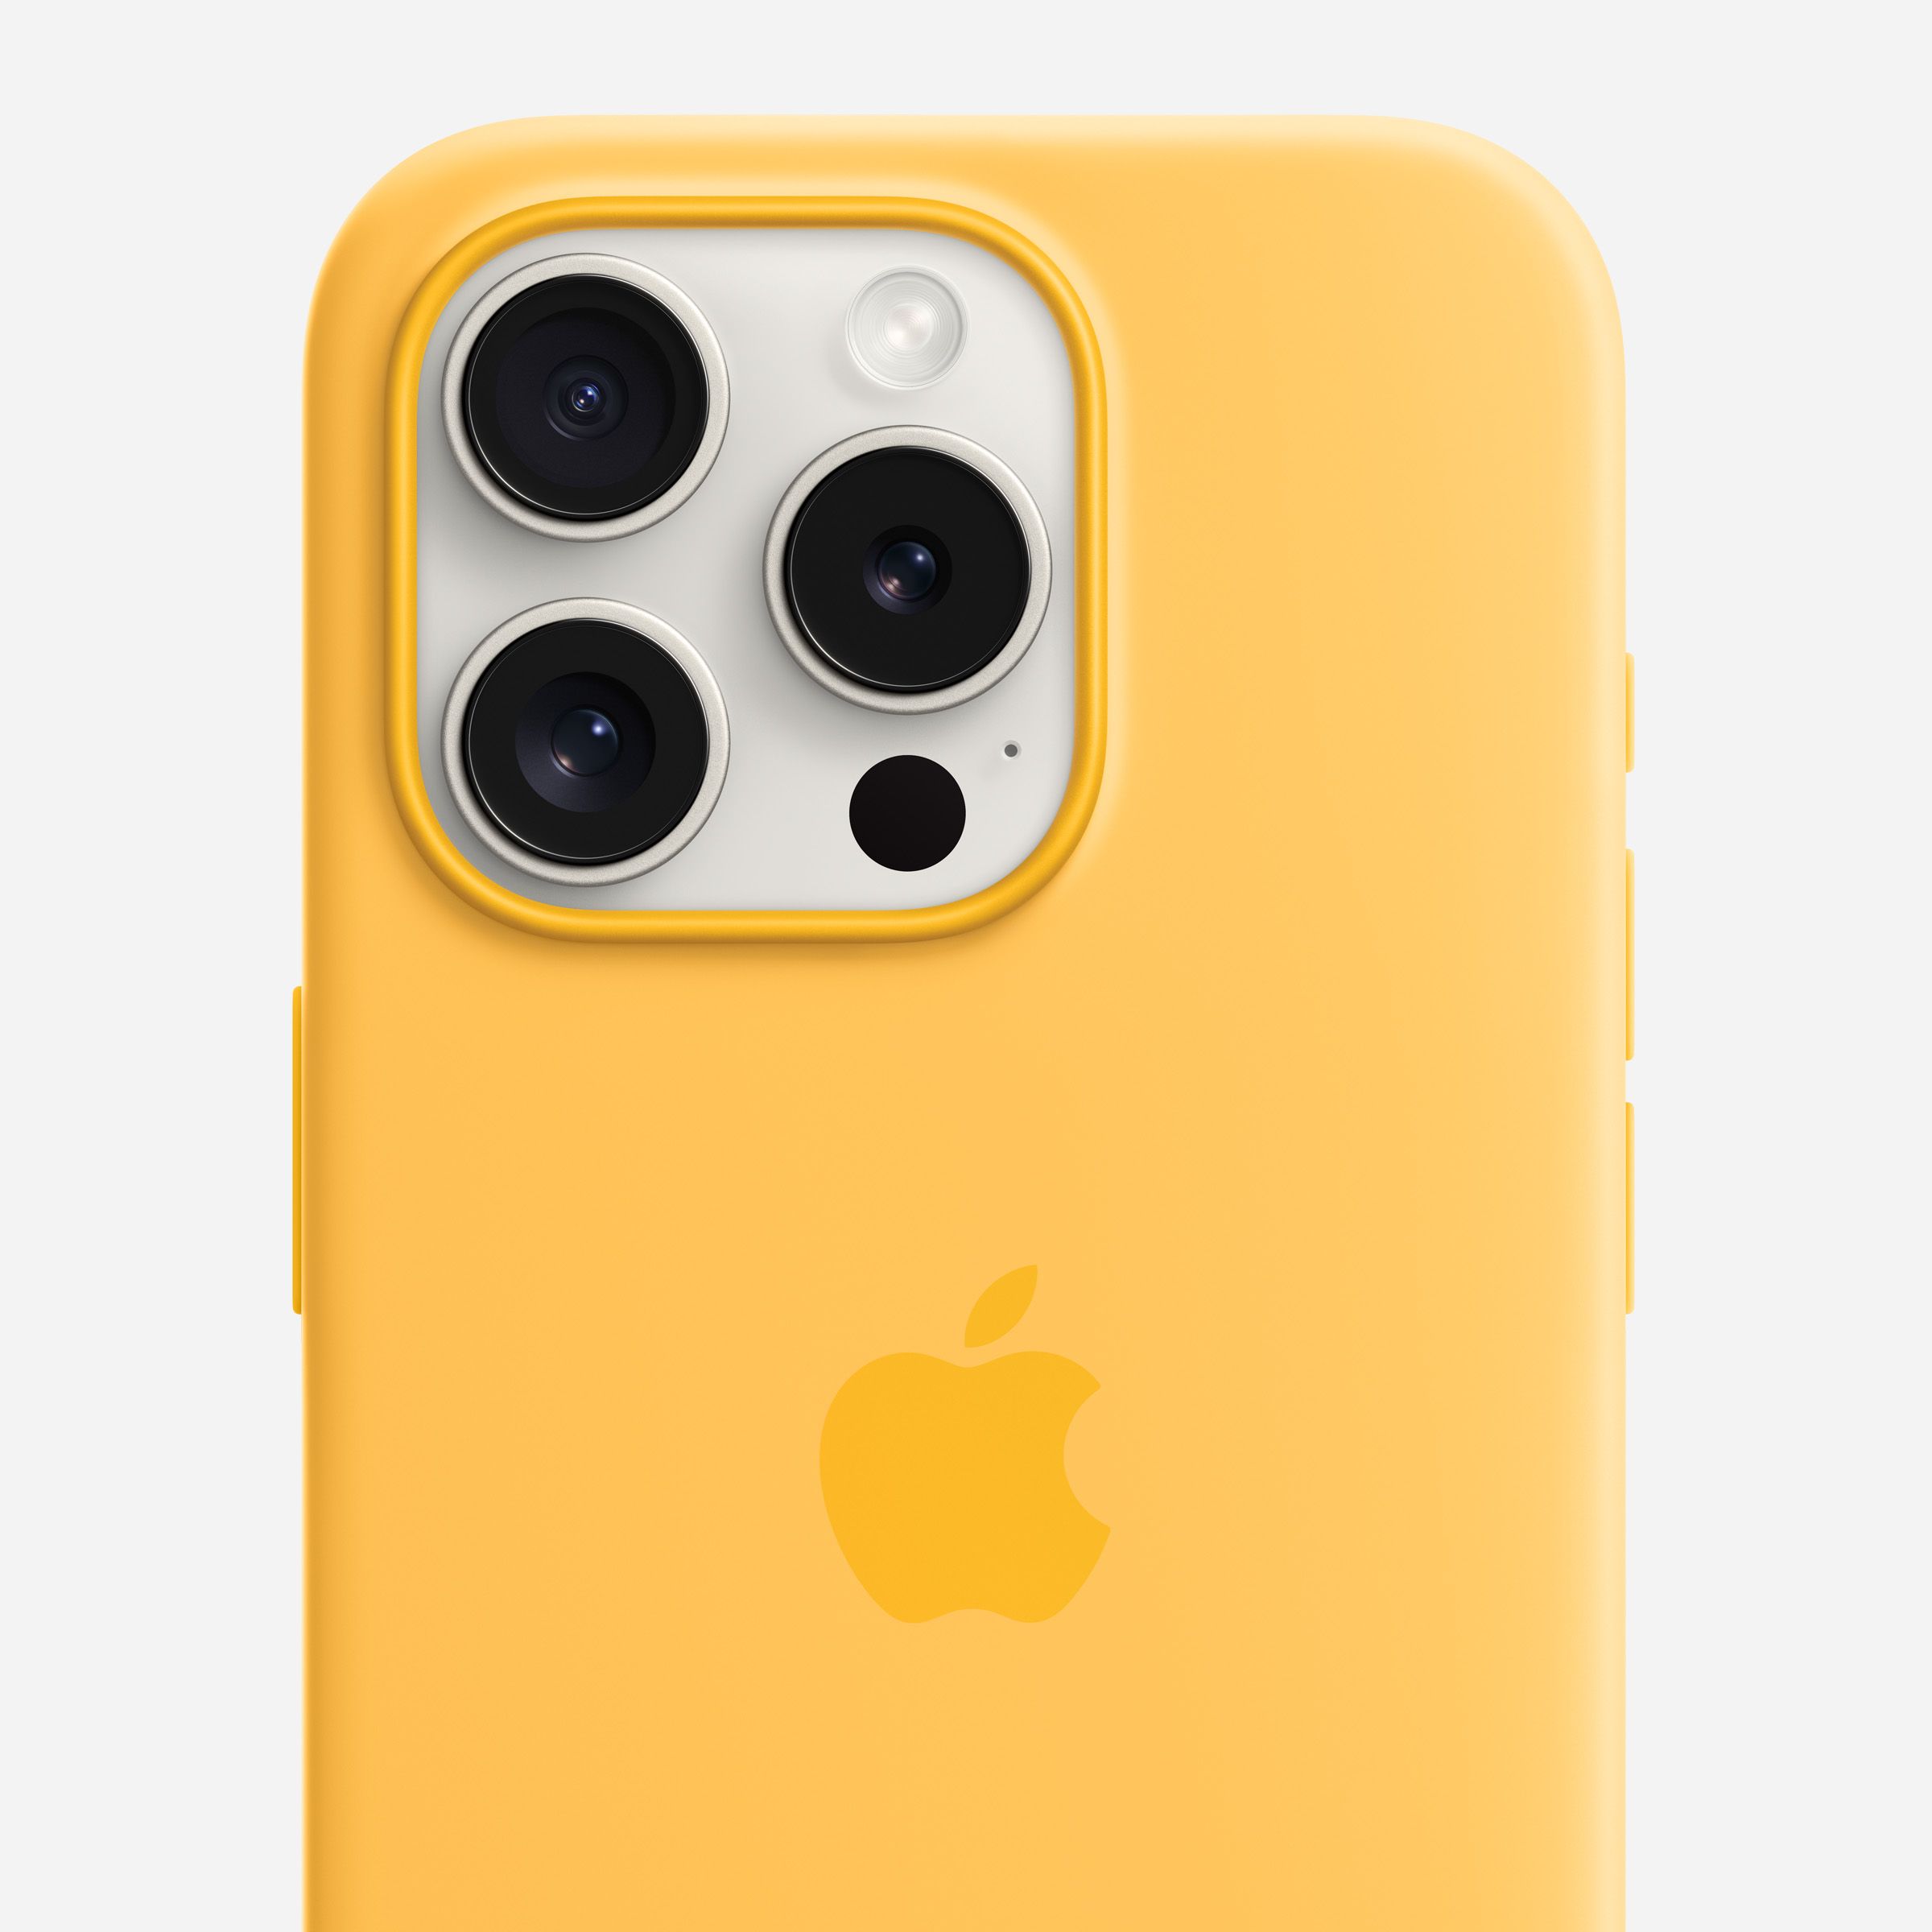 Apple iPhone with yellow case